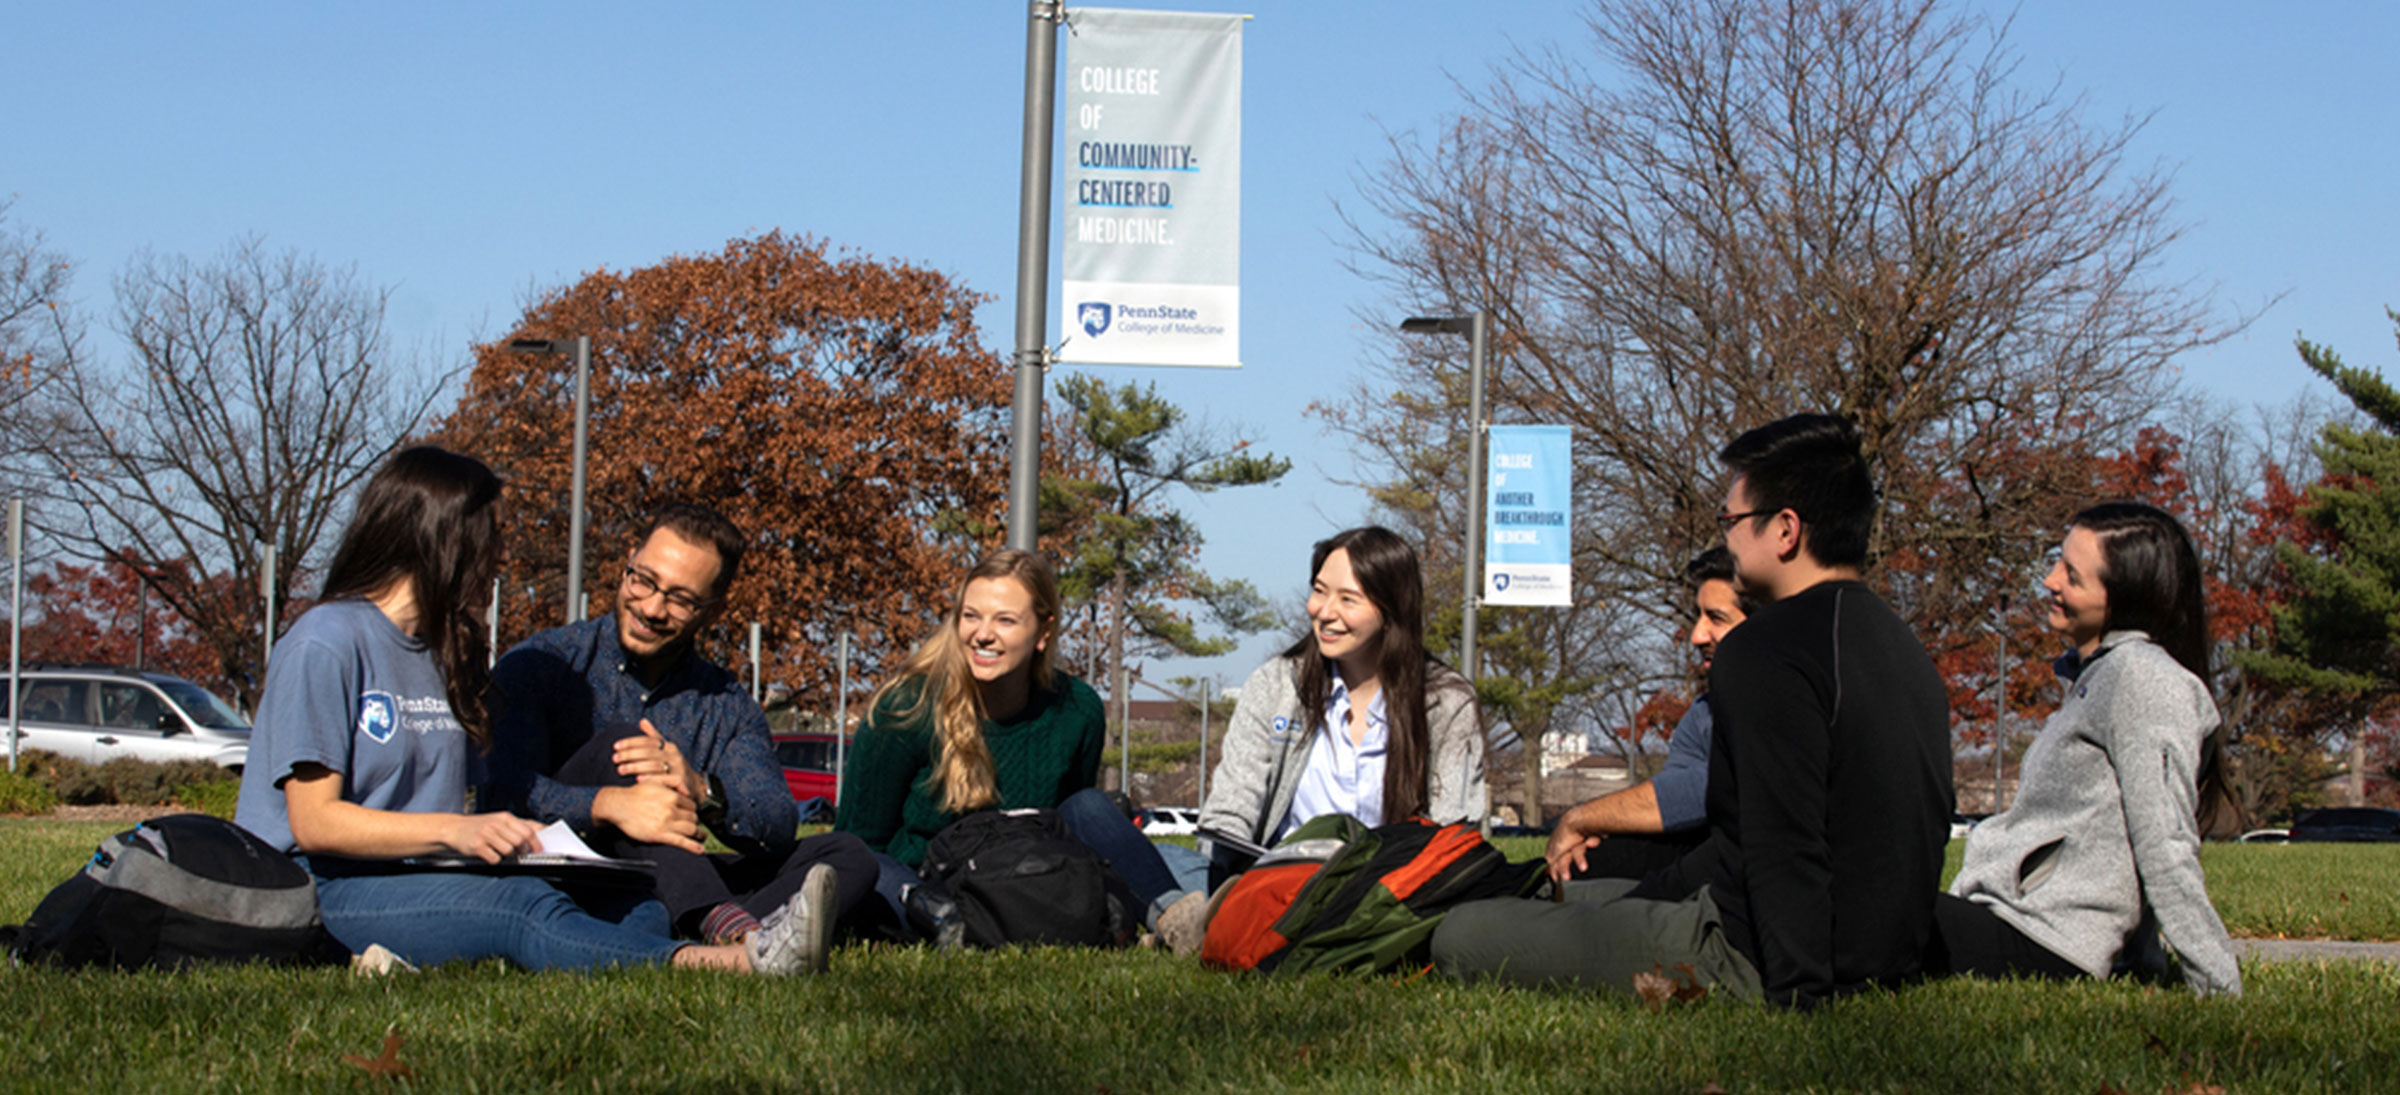 Three Penn State College of Medicine students are seen sitting in an outdoor courtyard in fall 2019, laughing together. A laptop is open on a table in front of them.